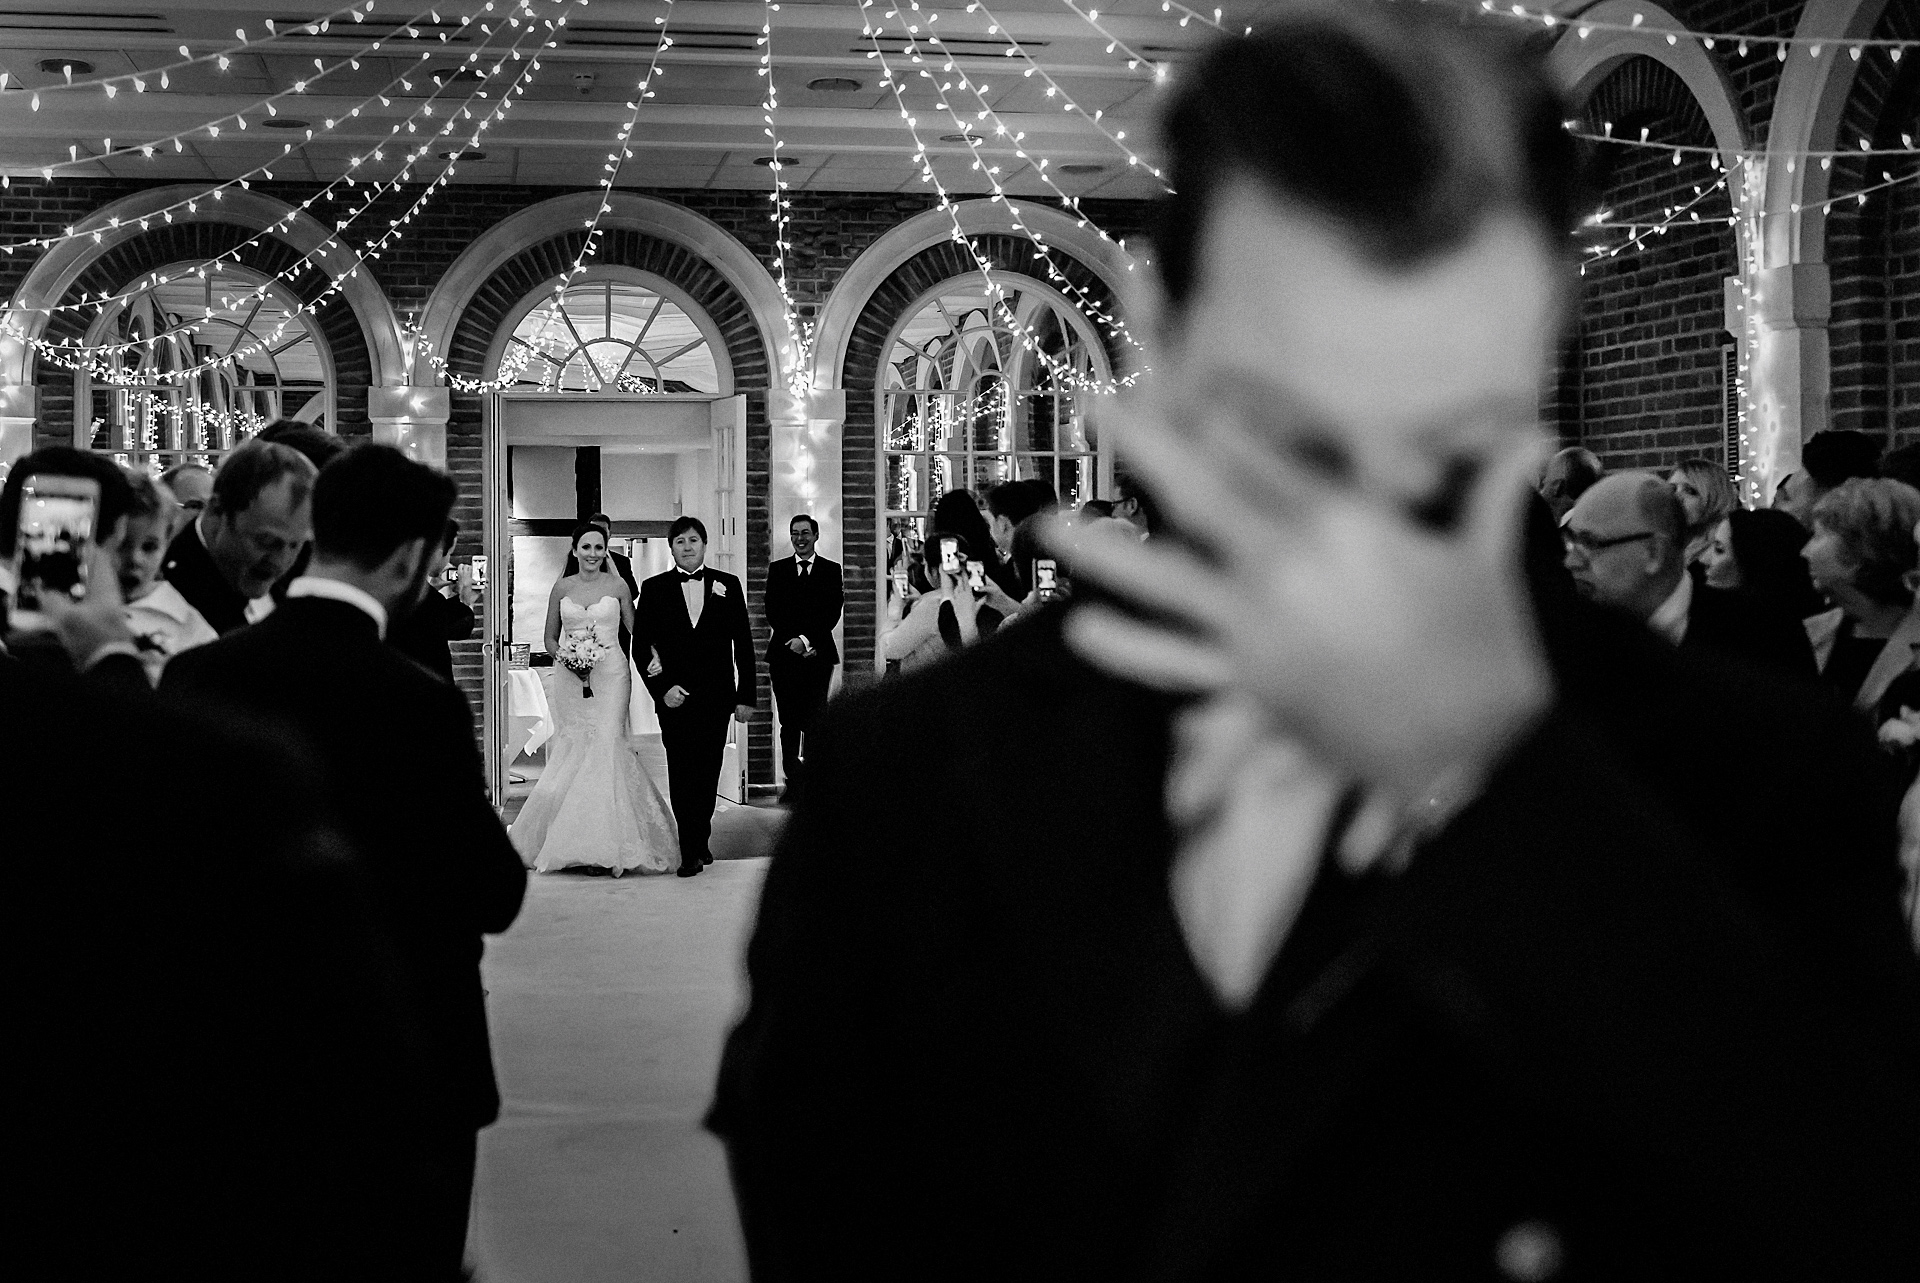 photo of the groom's reaction as the bride walks down the aisle